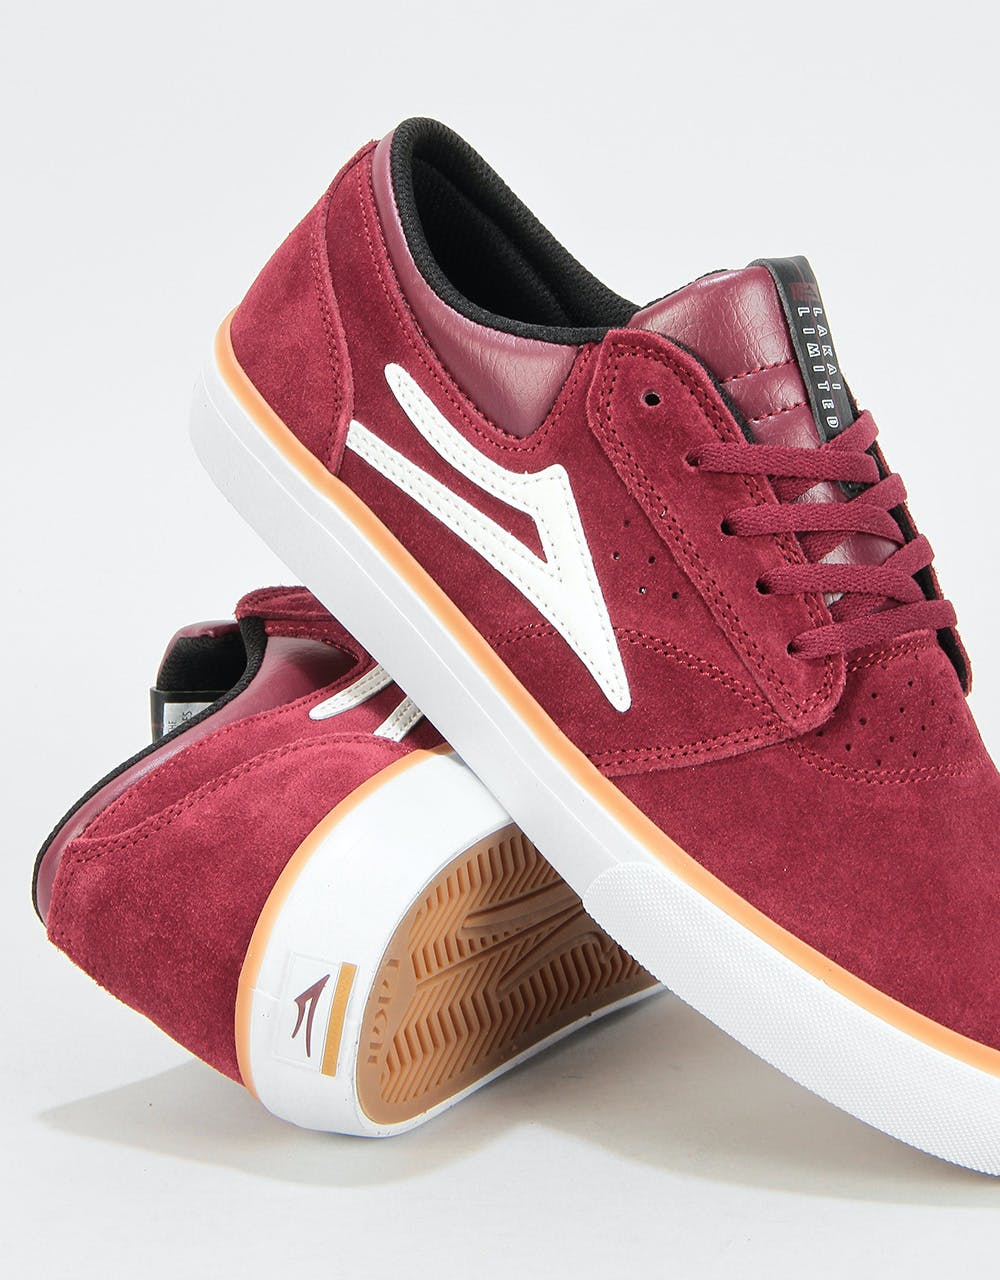 Lakai Griffin Skate Shoes - Burgundy Suede